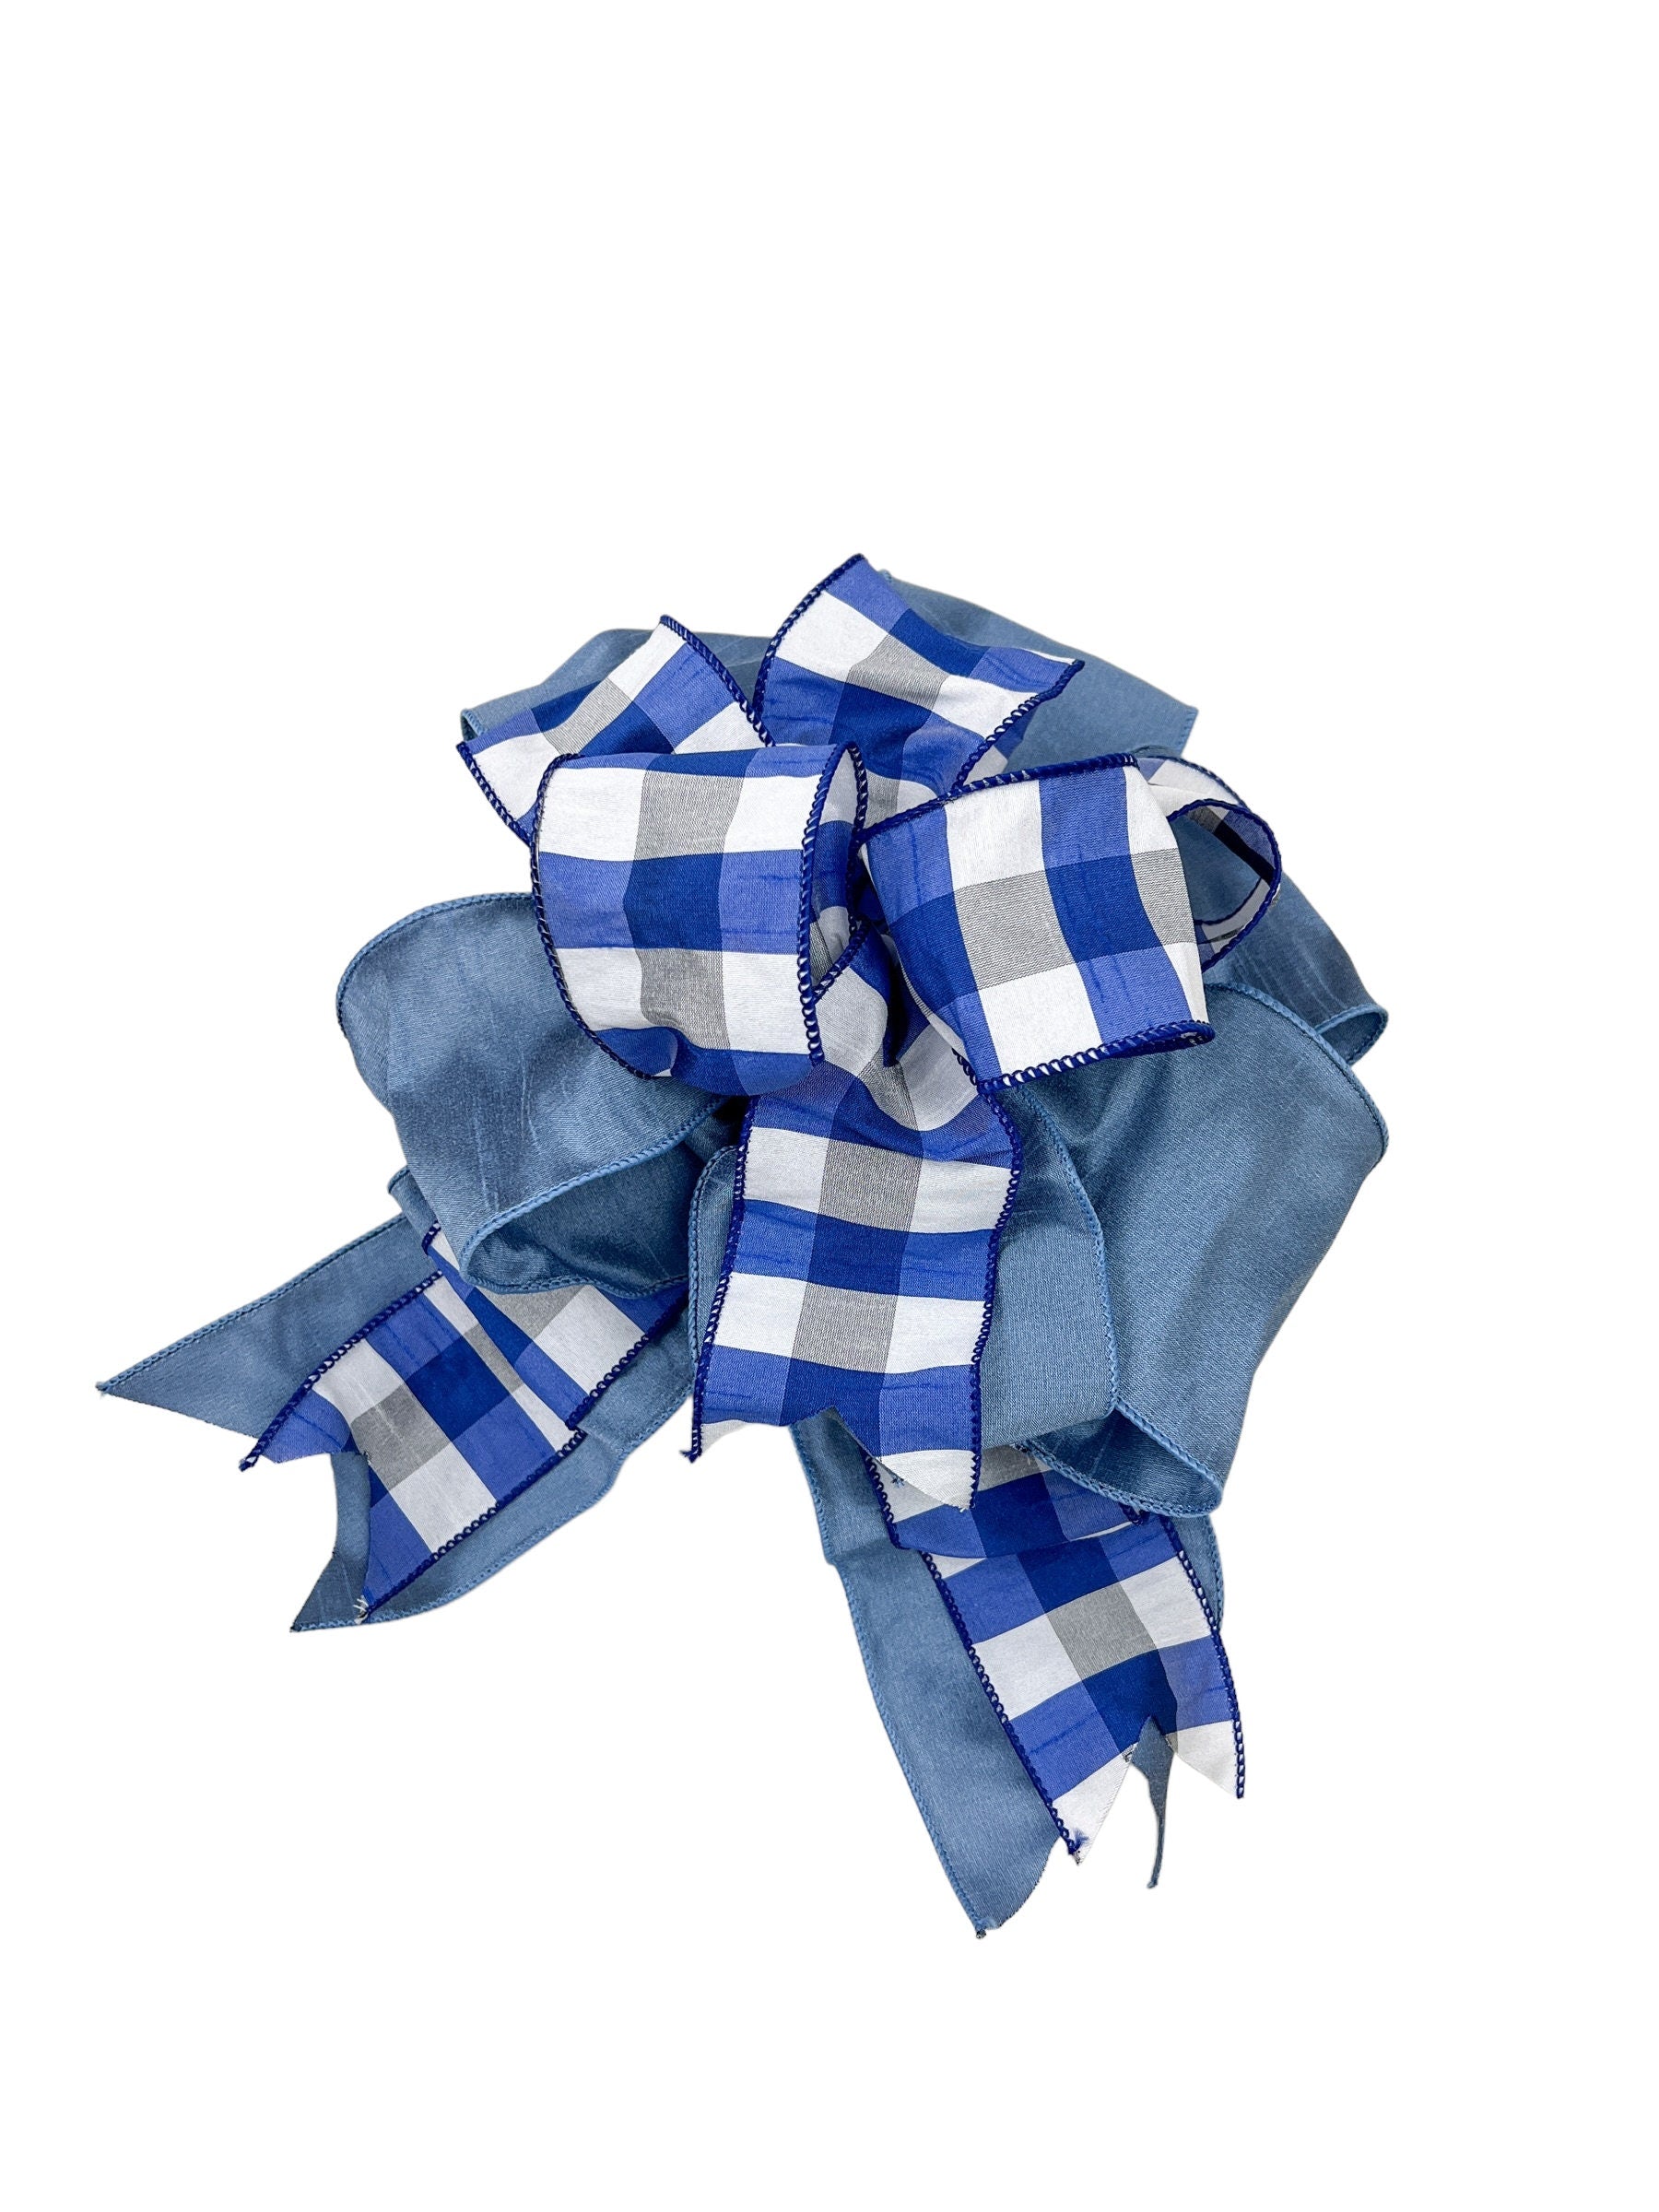 Handmade luxury wreath bow, French blue dupioni and blue gingham check